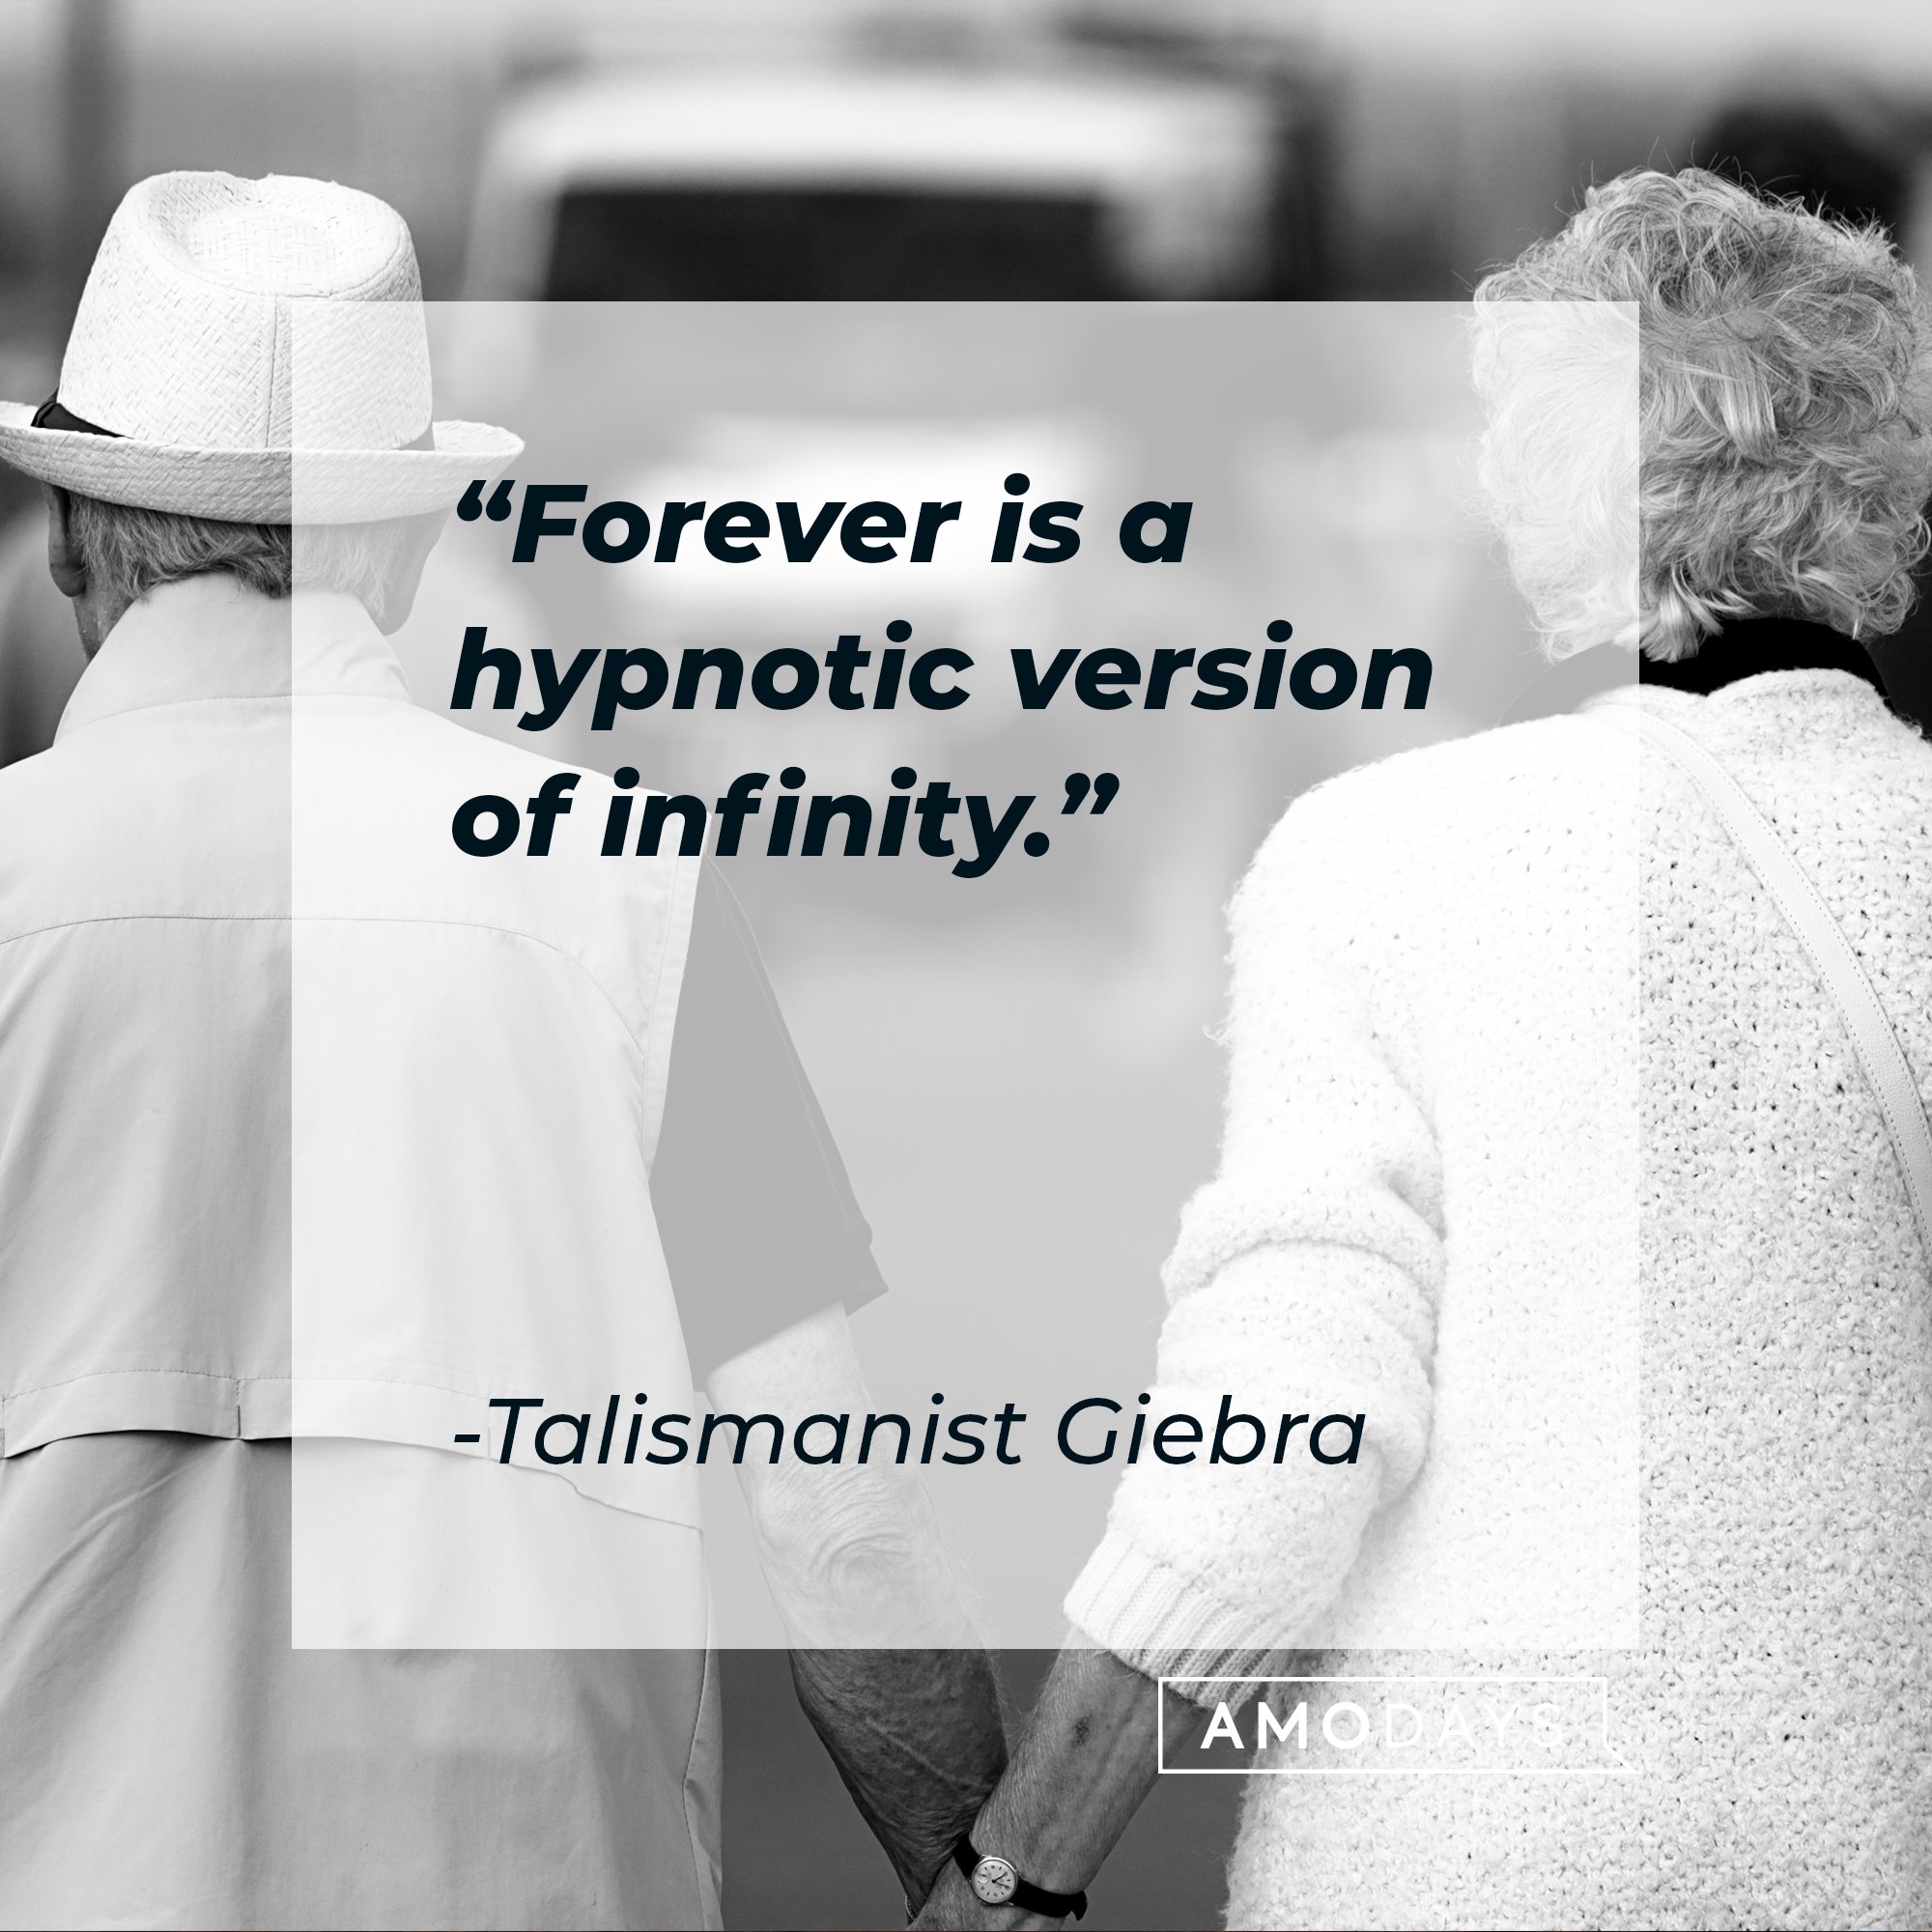 Talismanist Giebra’s quote: "Forever is a hypnotic version of infinity." | Image: AmoDays 